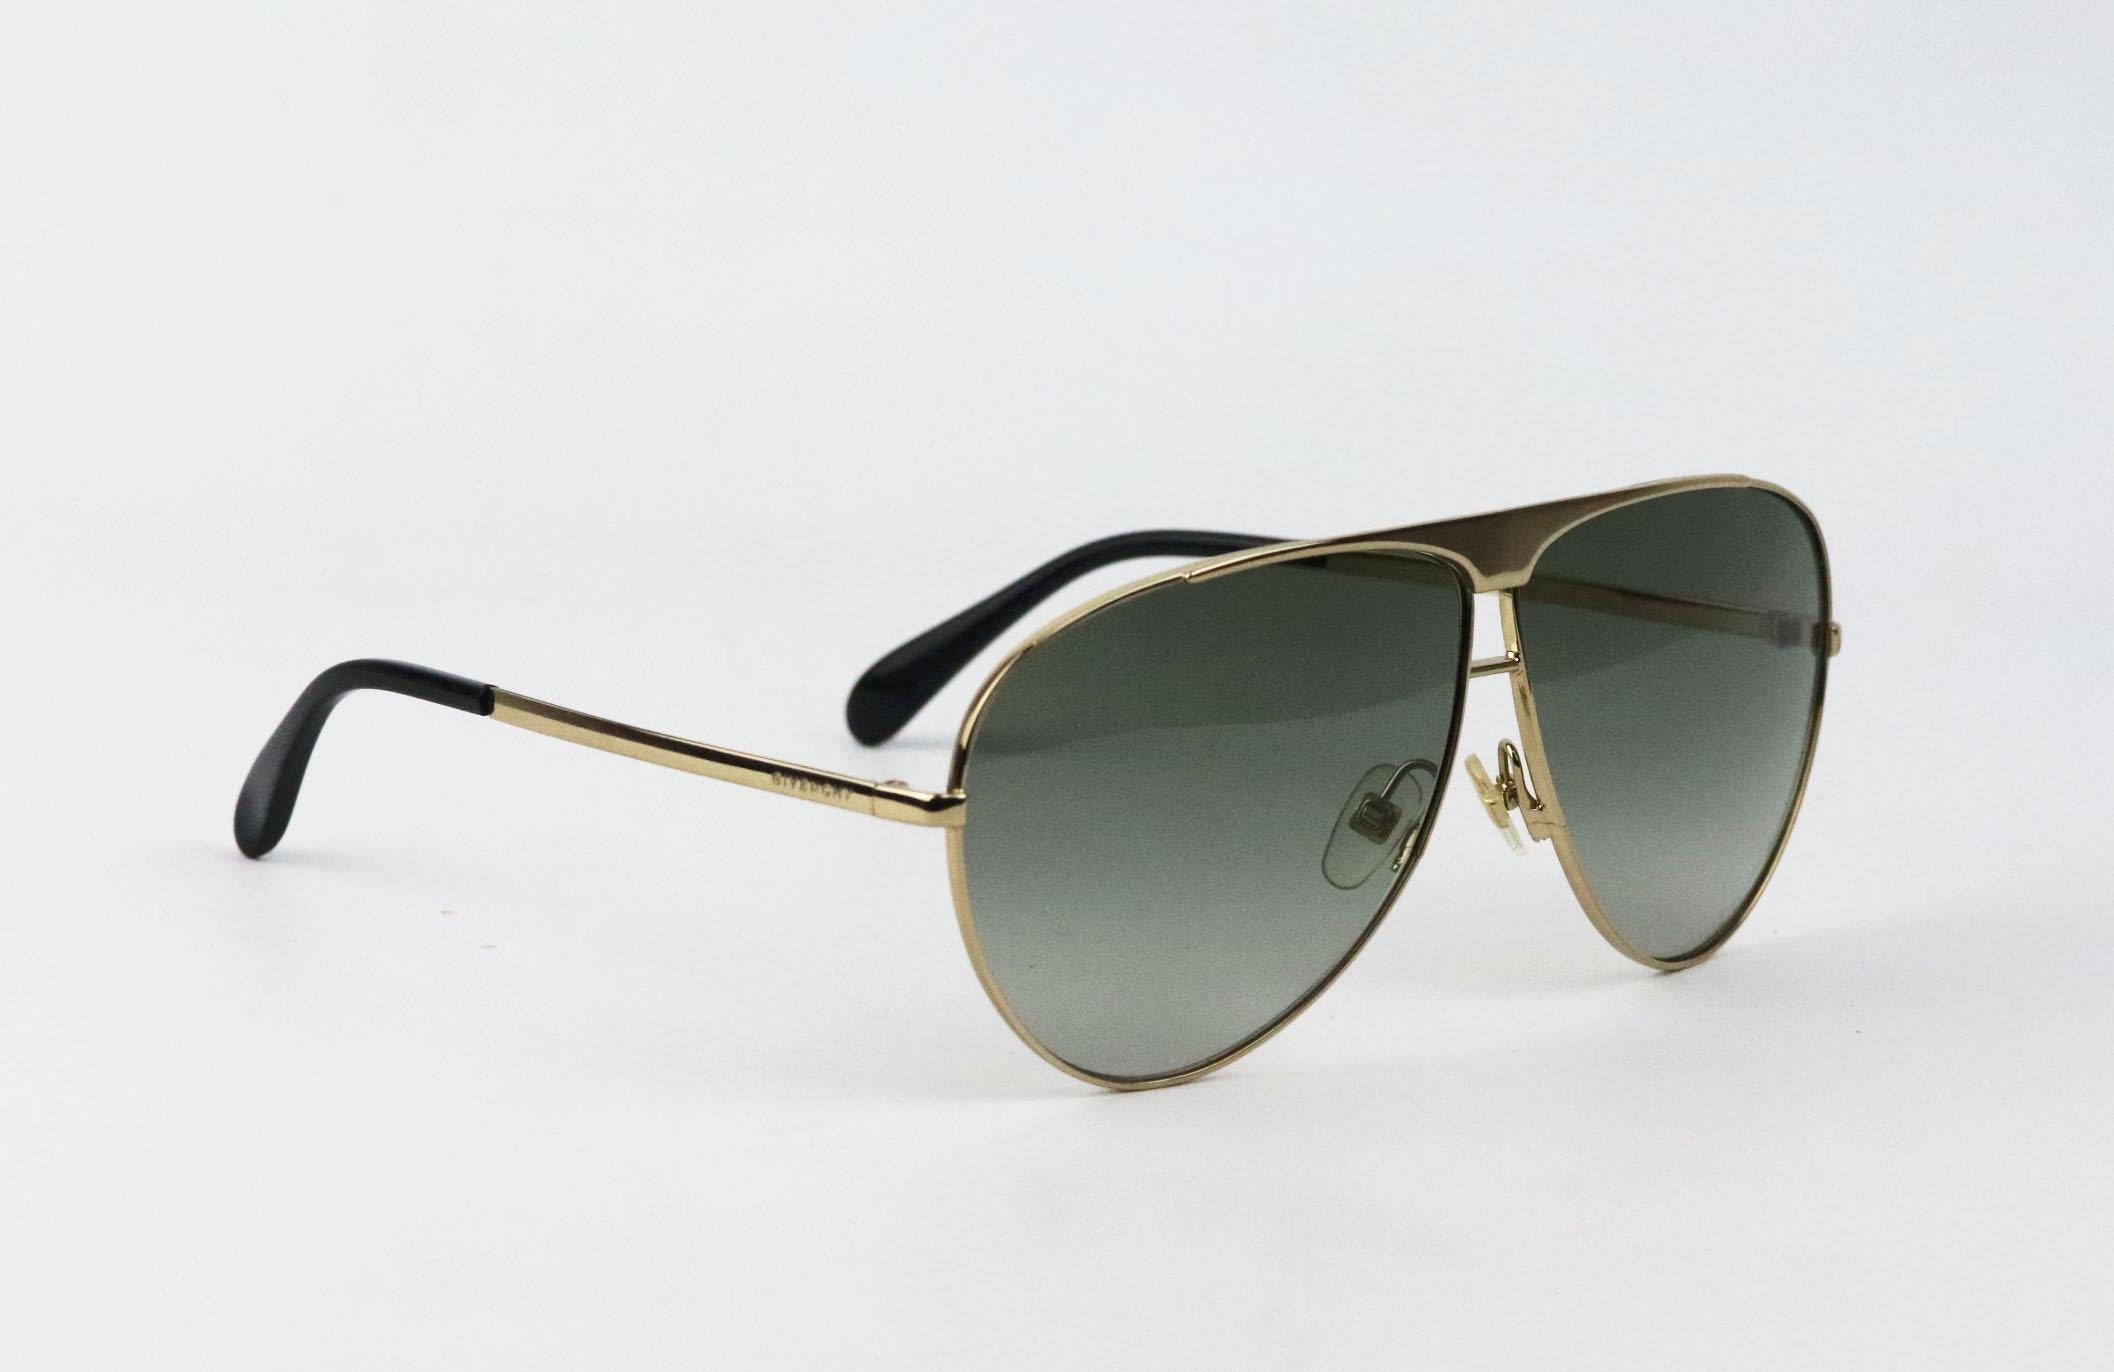 These sunglasses by Givenchy sunglasses are modelled on retro pairs, fitted with dark-black lenses, they've been made in Italy from gold-tone metal and feature the brand's logo at the temples.
Does not come with case.
Style code: GV7128/S.

Lens